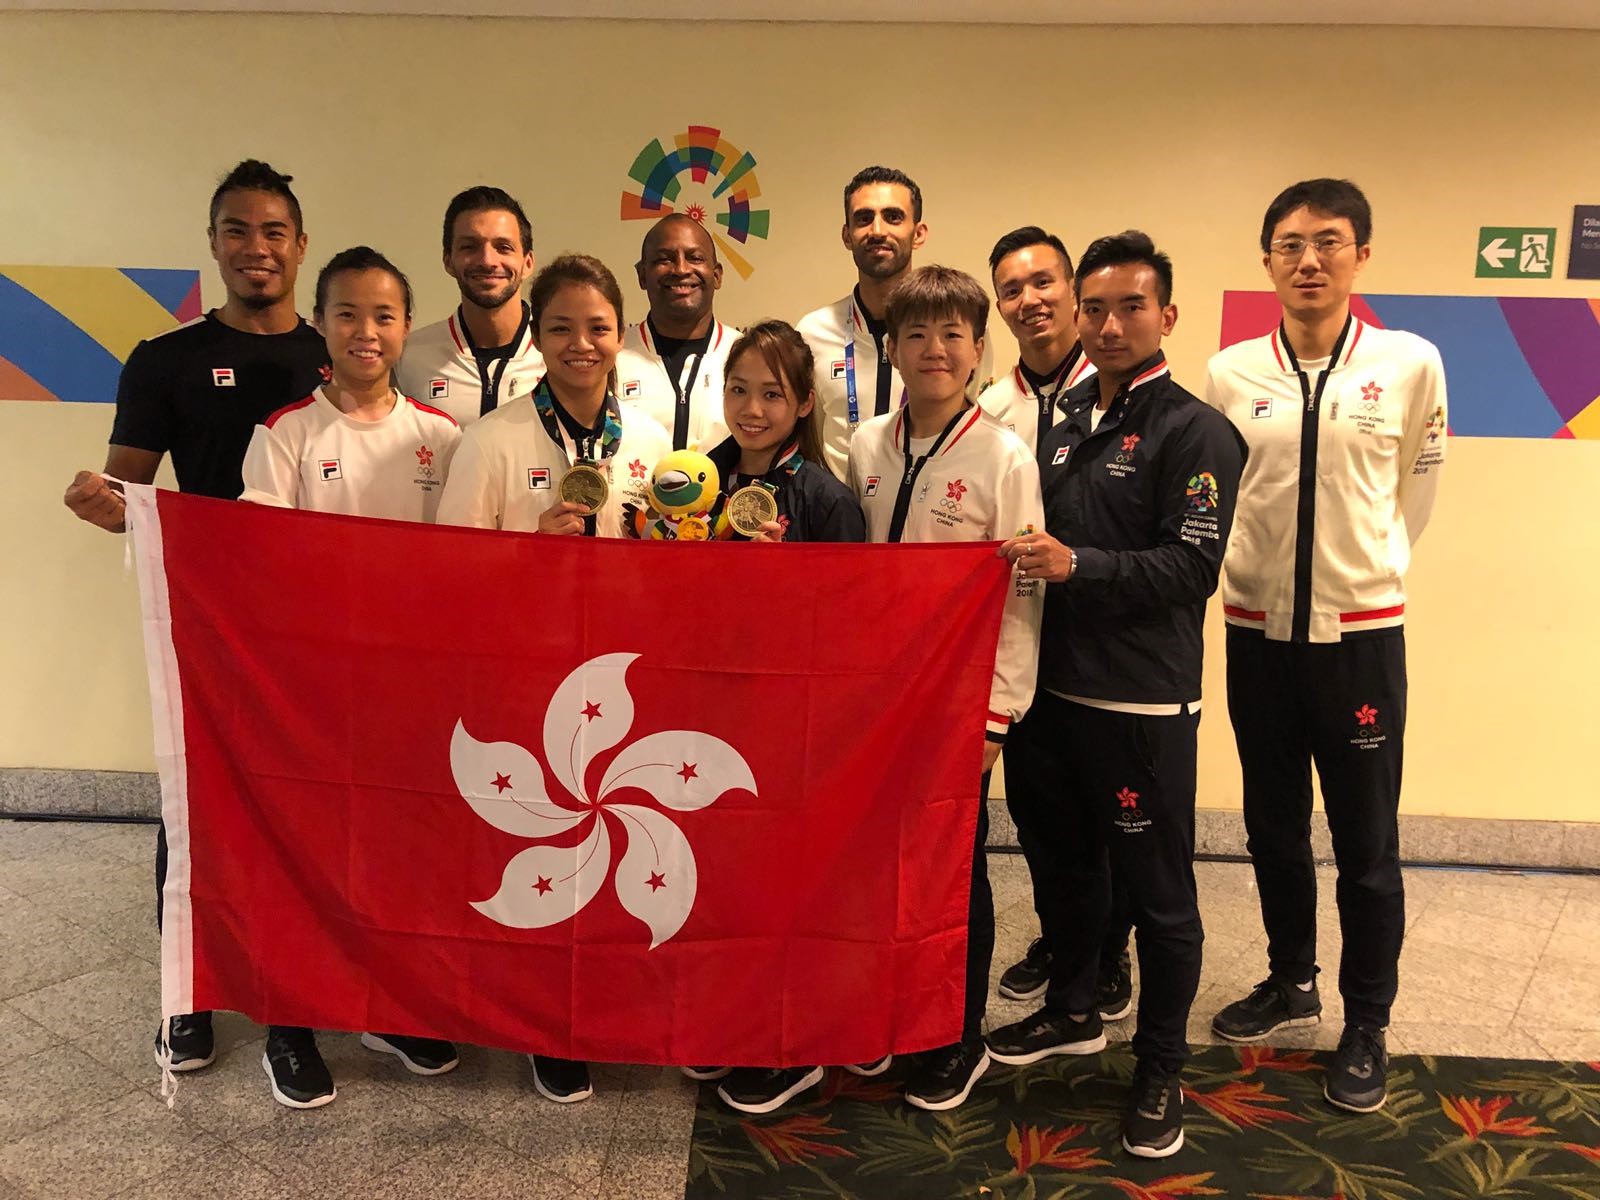 In August 2018, Grace Lau Mo-sheung (3rd from left, front row) won a bronze medal in Asian Games, the Hong Kong's first individual medal in the sport.